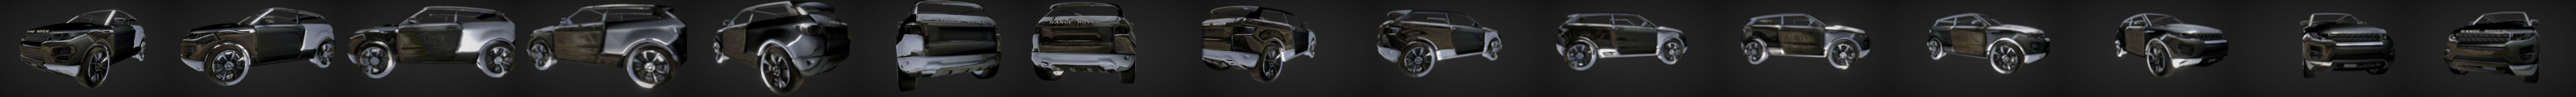 Range Rover Evoque Download Free 3d Model By Minghauloh